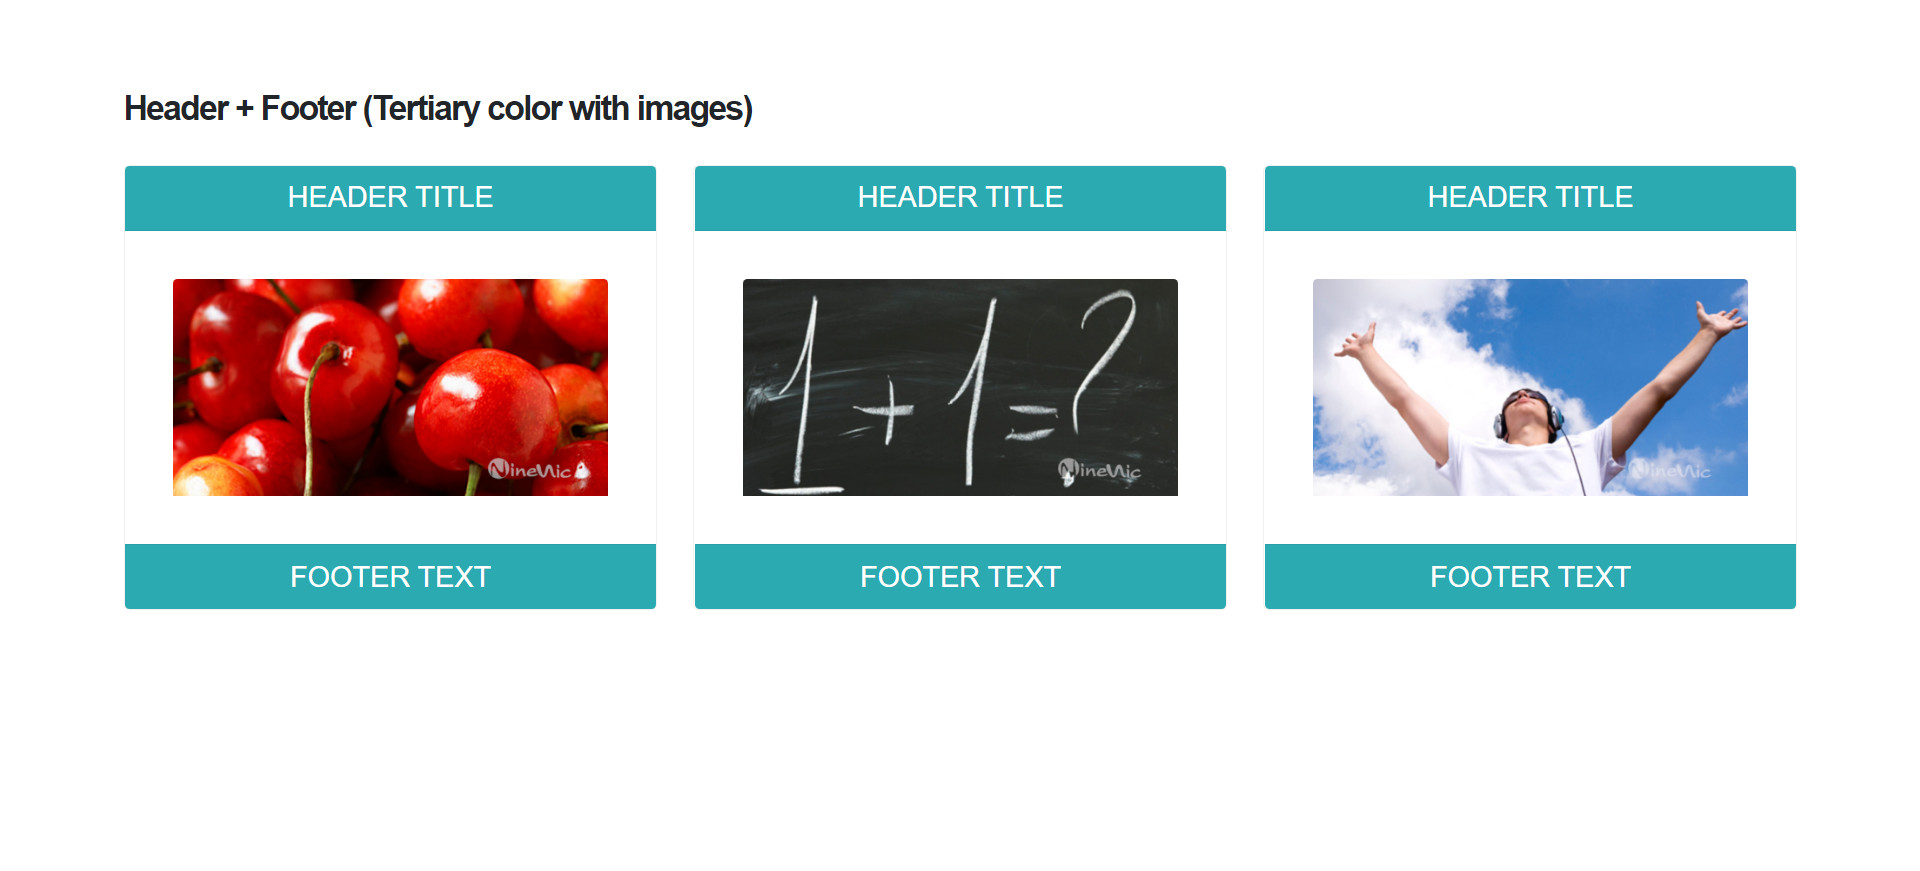 Shortcodes cards - header footer color tertiary and image แนะนำ เว็บไซต์สำเร็จรูป NineNIC